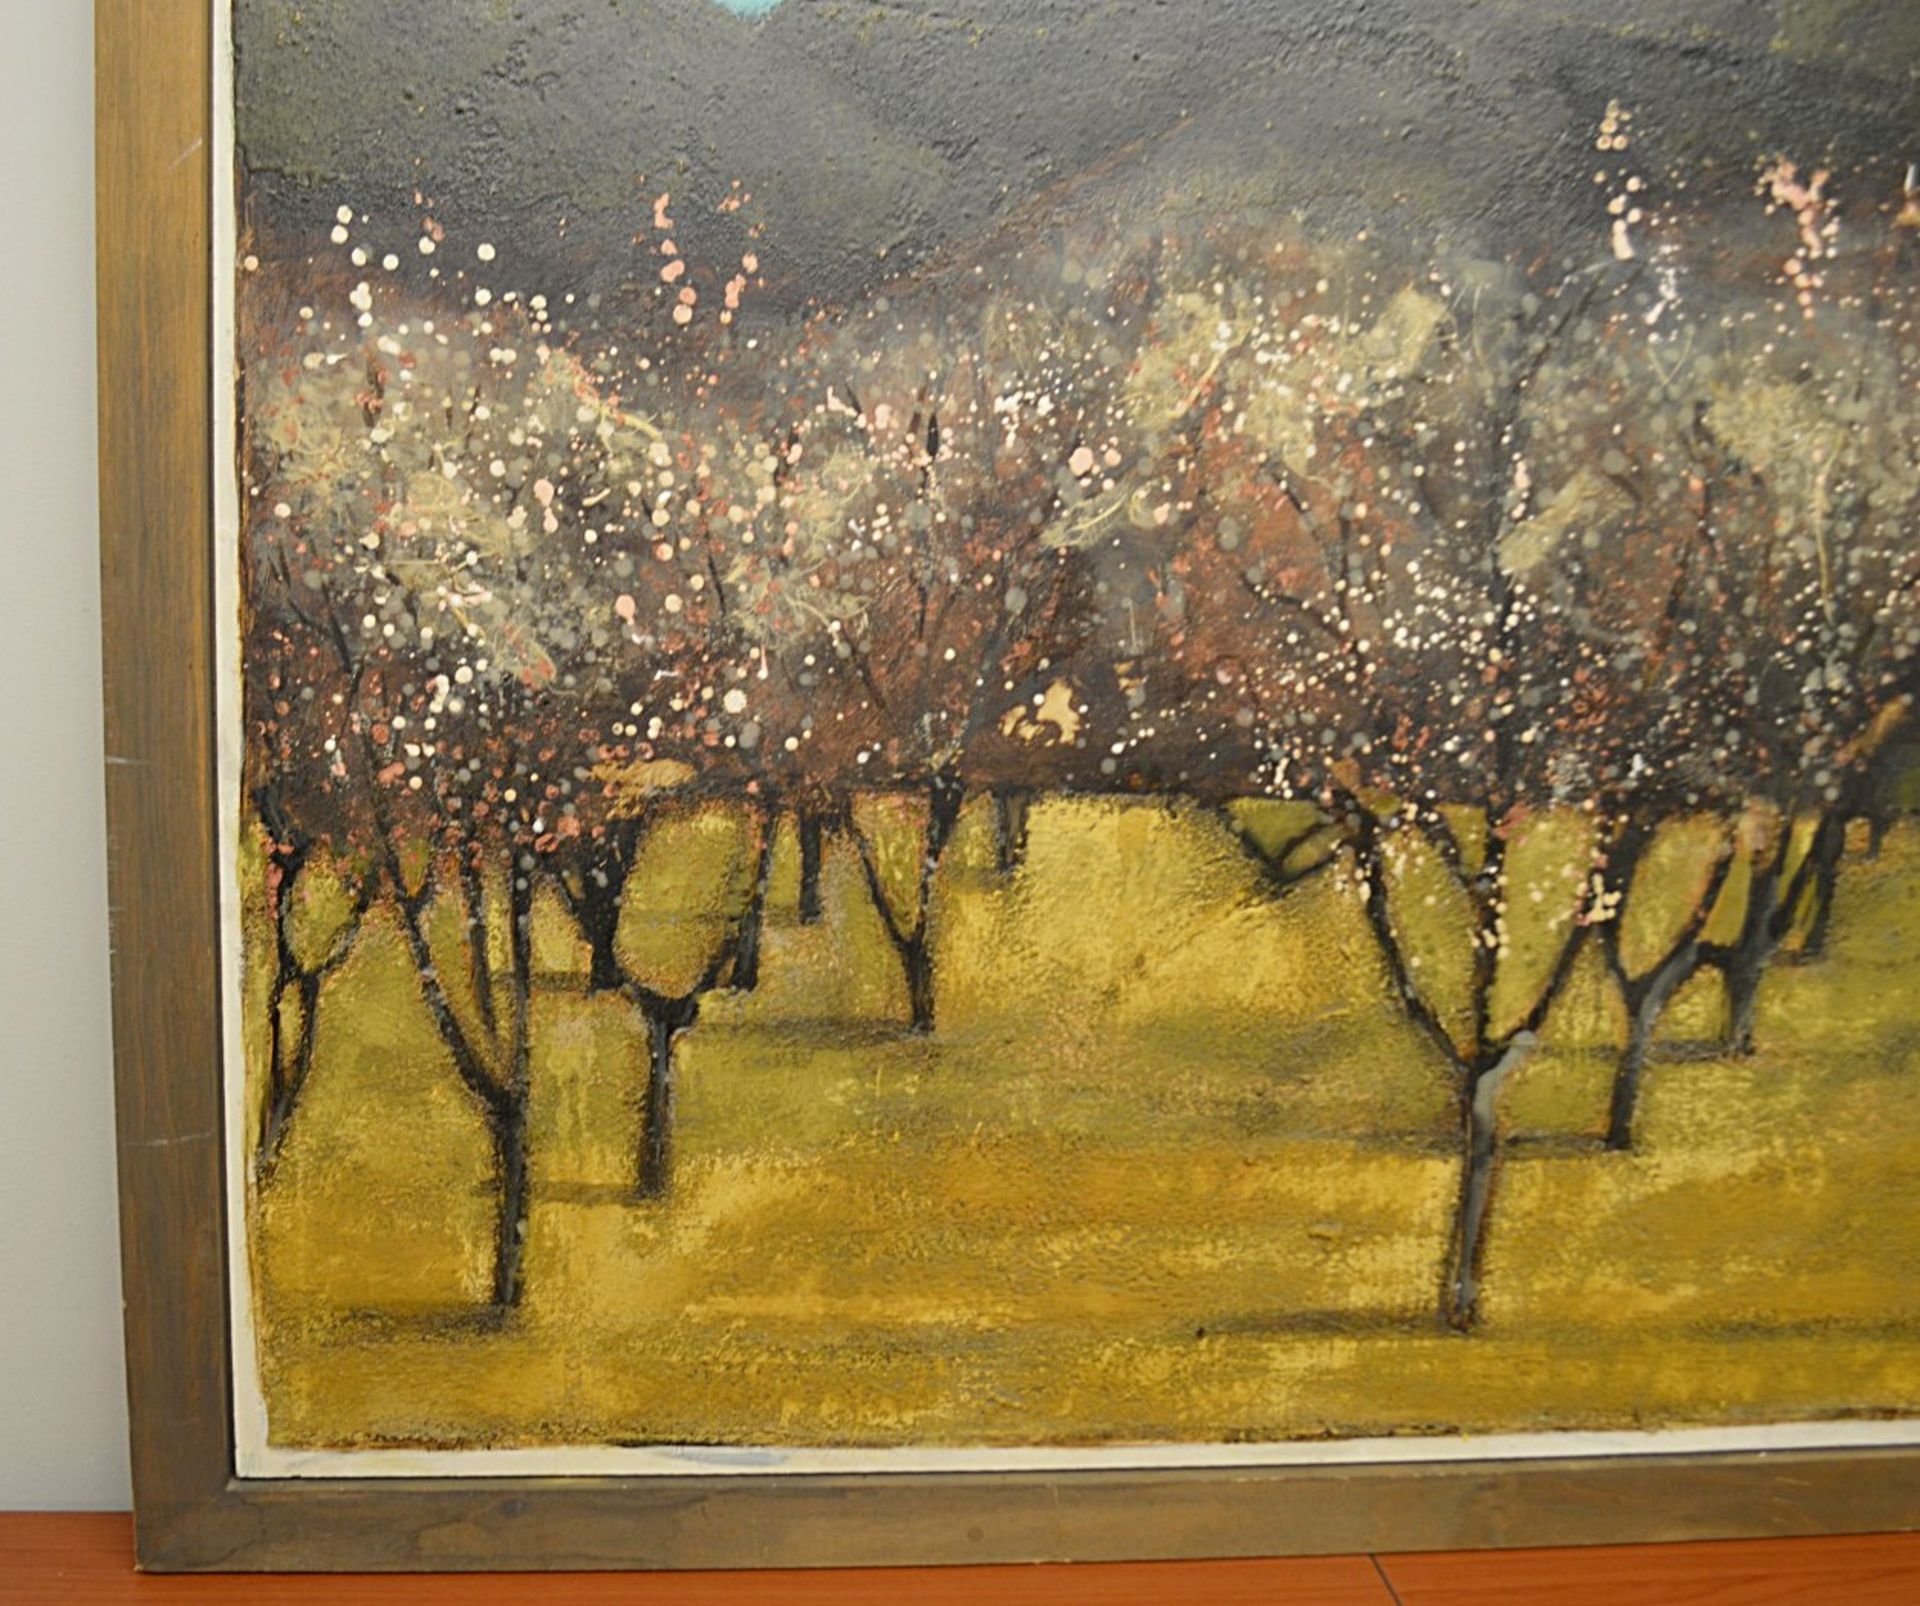 1 x Original Signed Framed Painting Of A Spanish Orchard By Lydia Bauman (1997) - Dimensions: 122 - Image 3 of 8